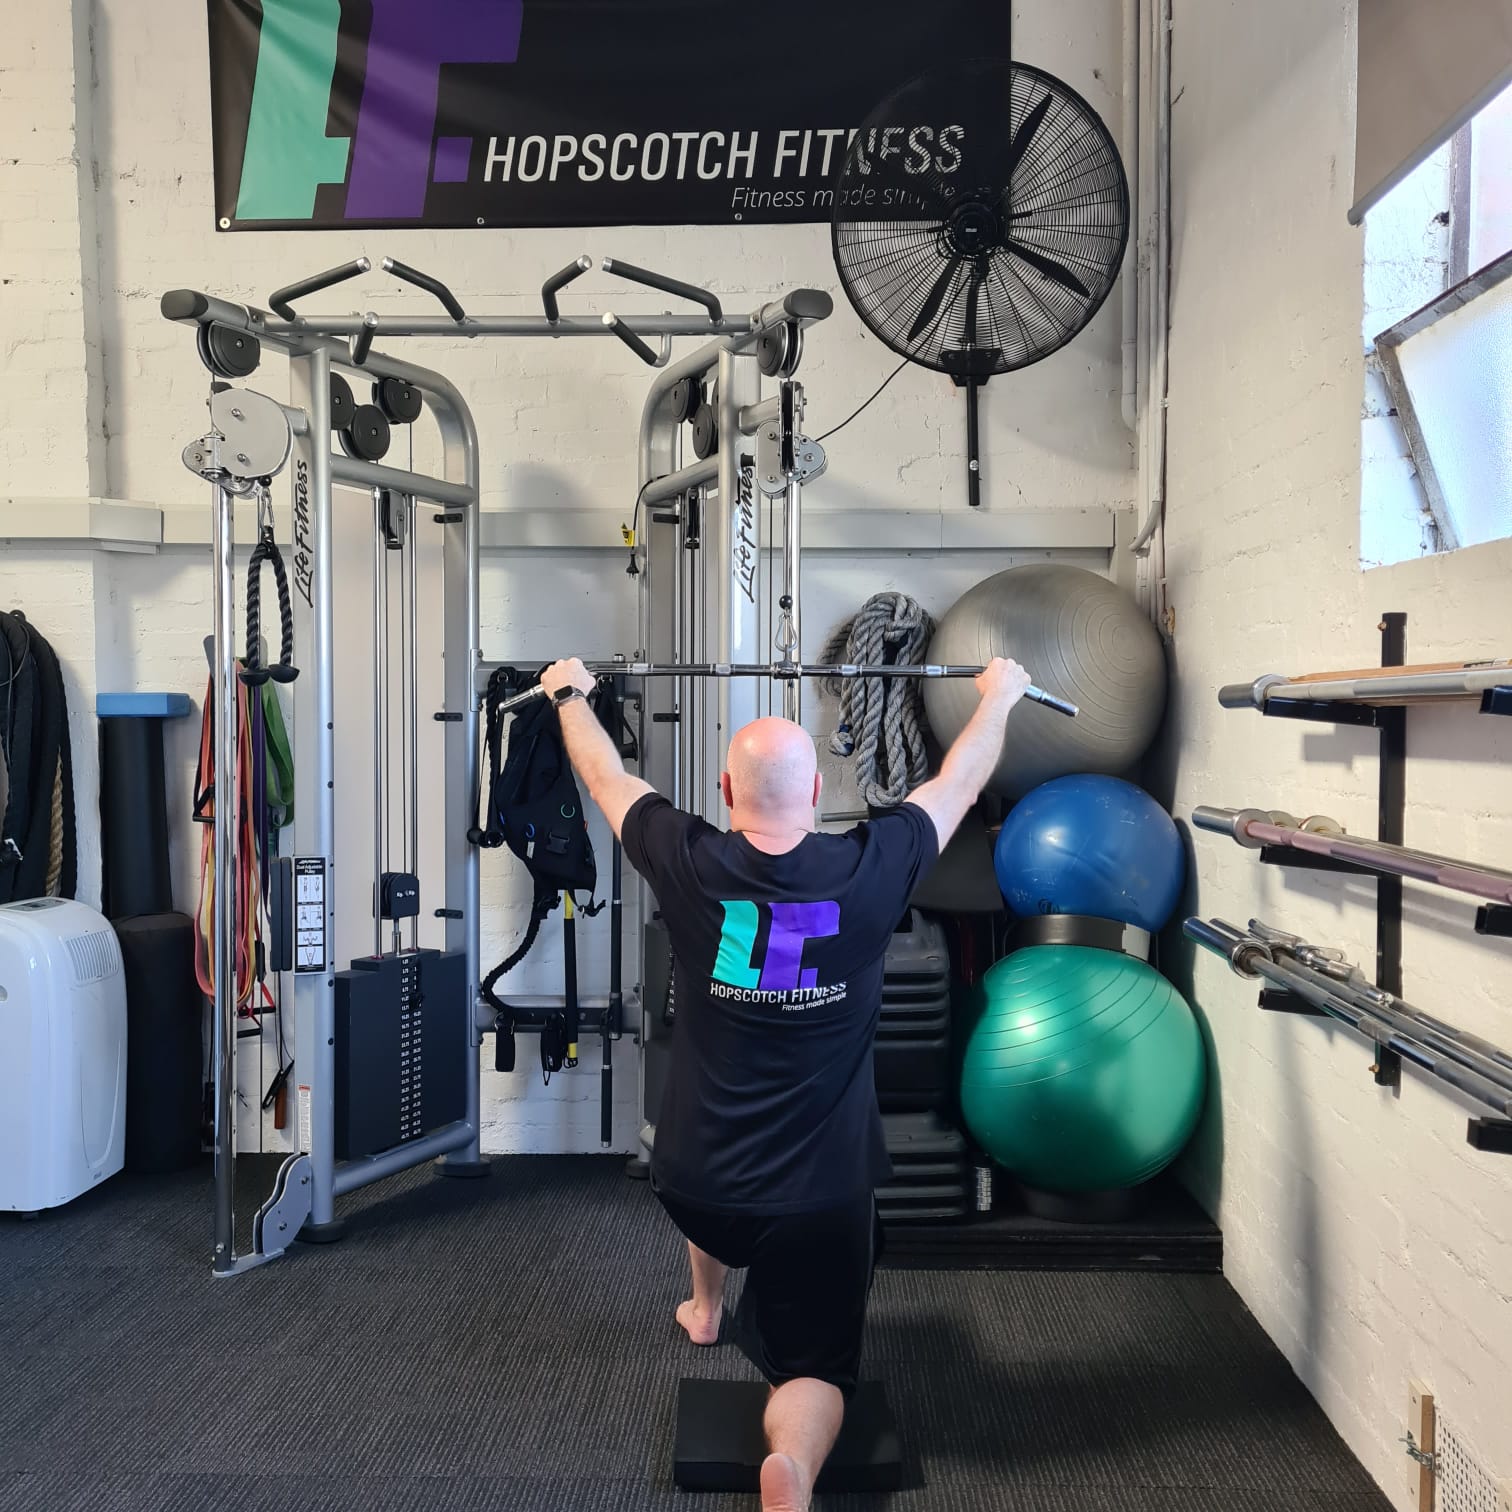 Lat pulls down during a personal training session. Hopscotch Fitness Burwood (03) 9808 6942